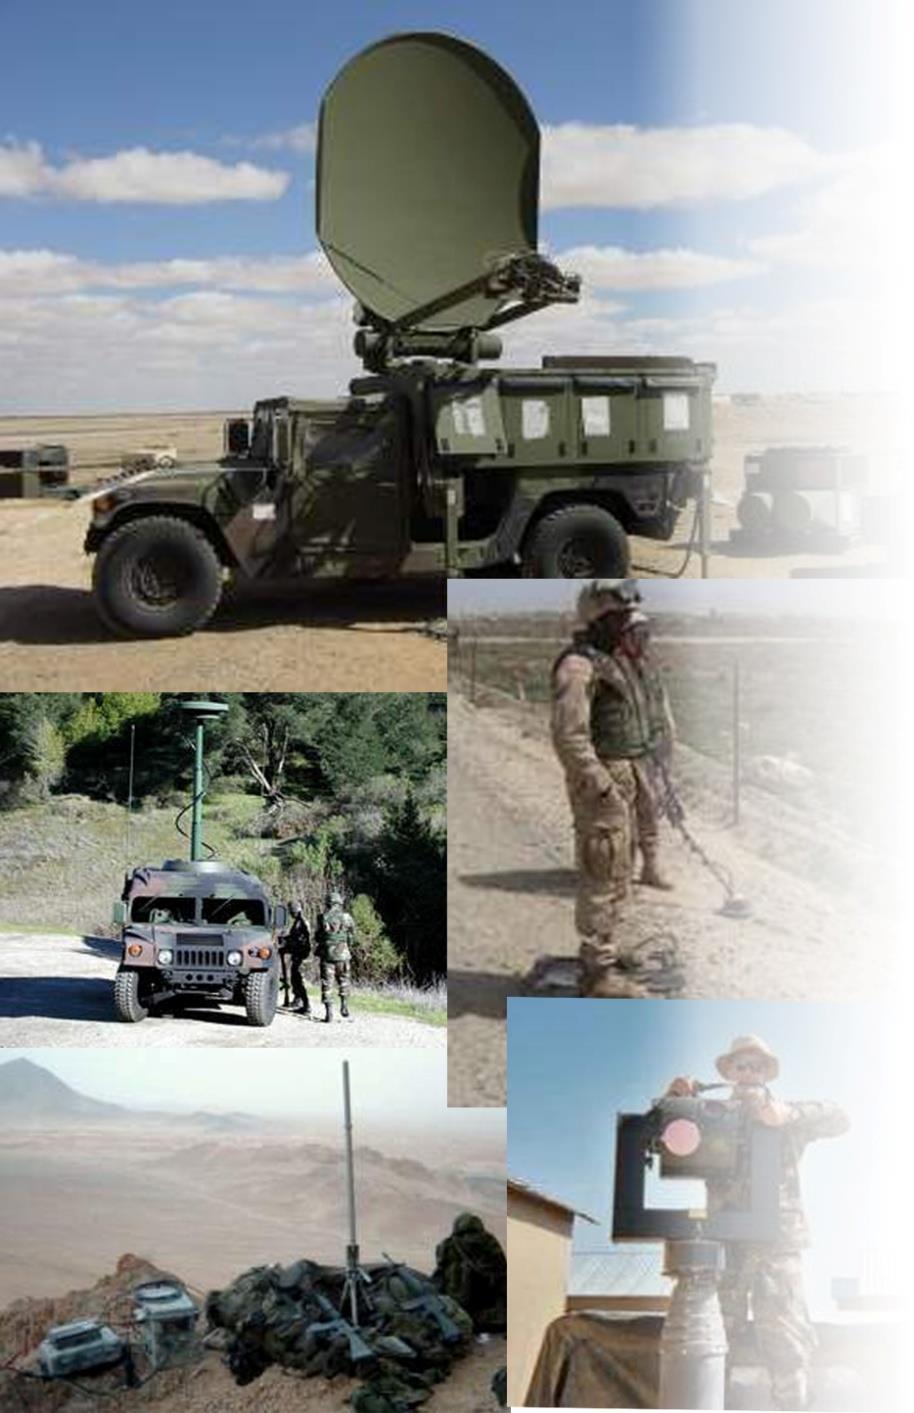 Communications-Electronics Research, Development and Engineering Center Mission: To develop and integrate Command, Control, Communications, Computers, Intelligence, Surveillance, Reconnaissance